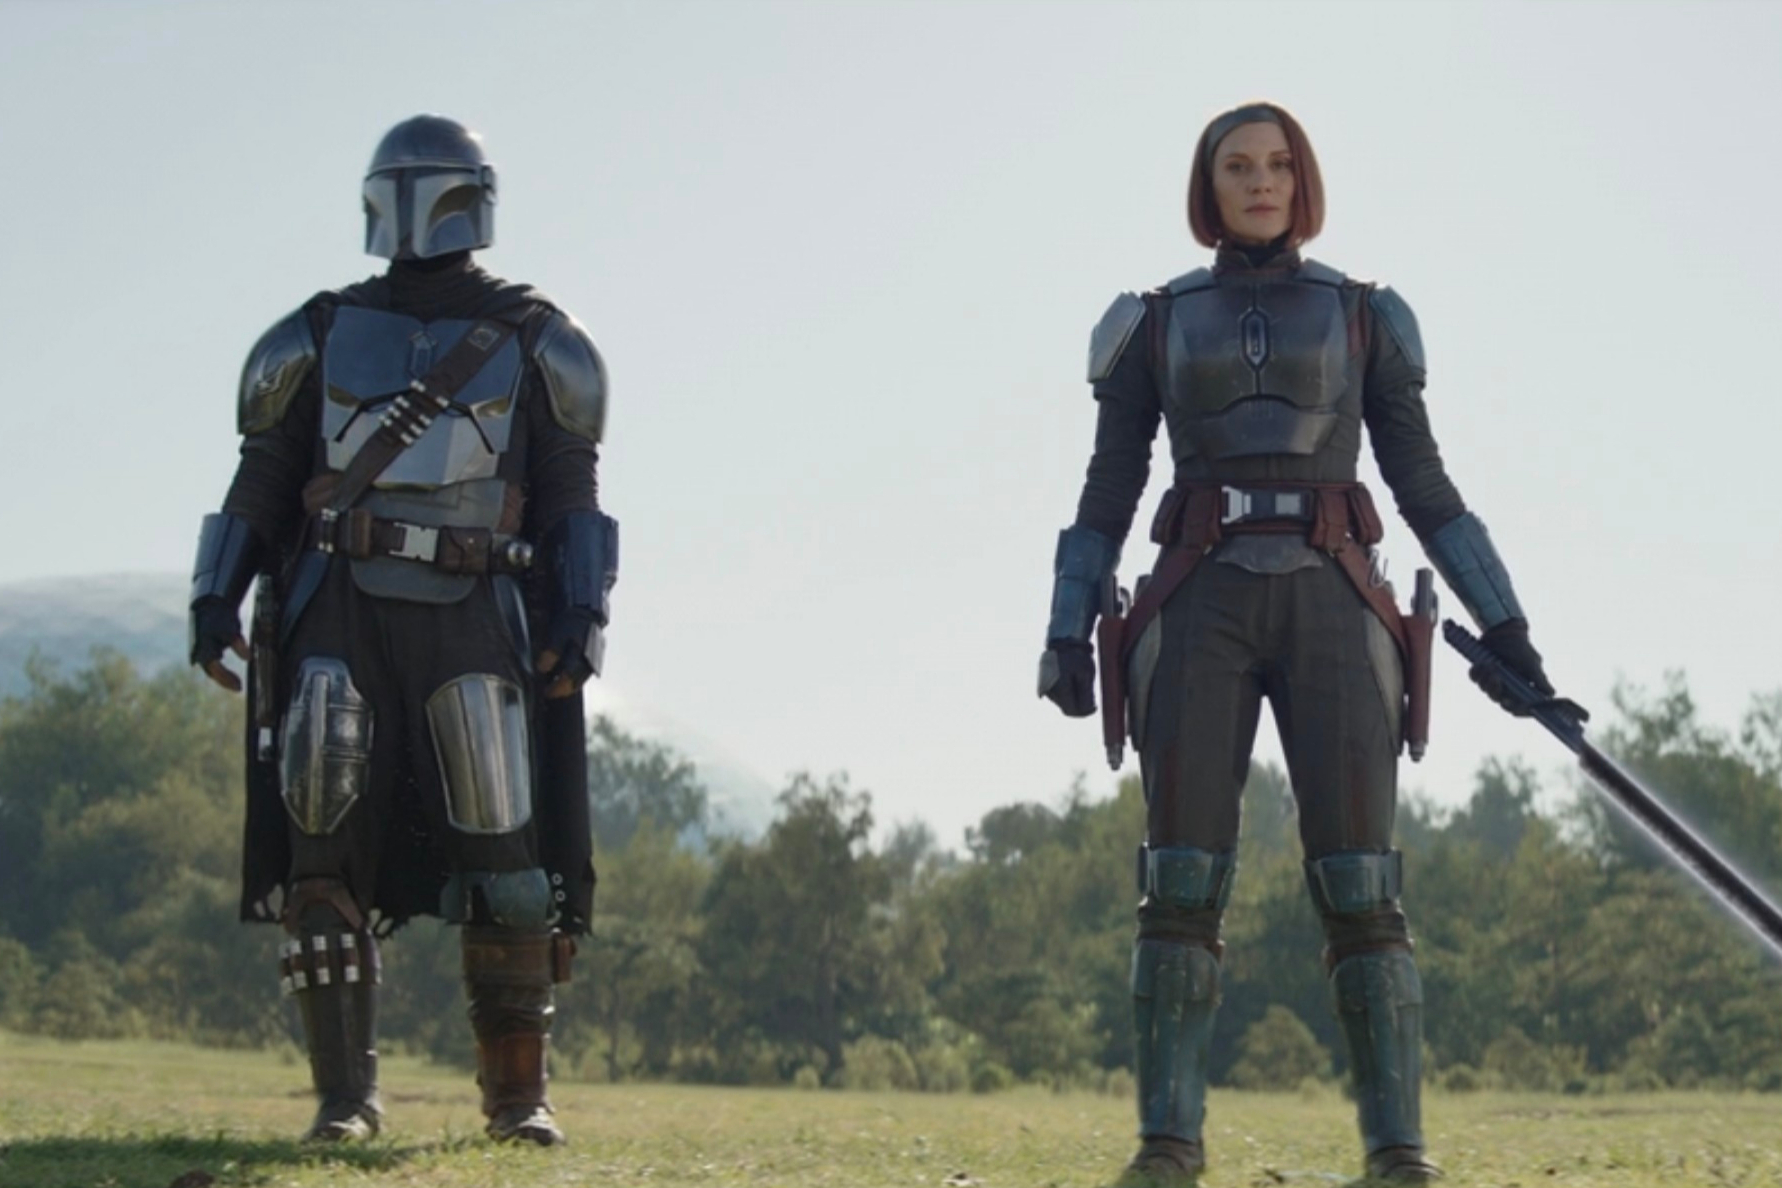 How The Mandalorian season 4 could change into a movie, according